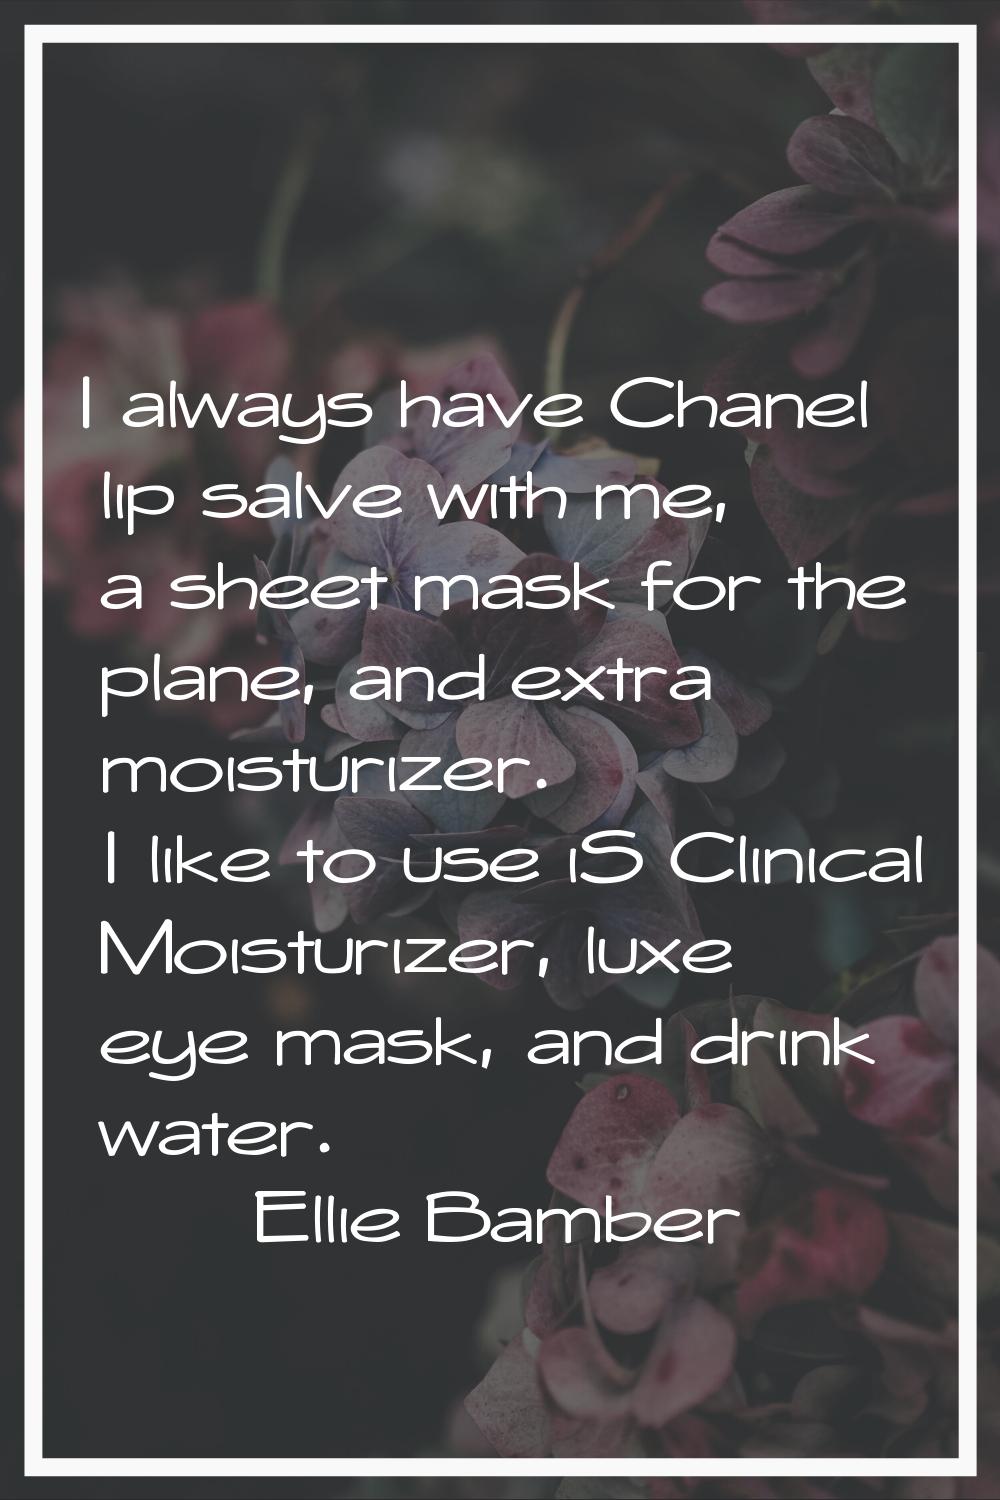 I always have Chanel lip salve with me, a sheet mask for the plane, and extra moisturizer. I like t